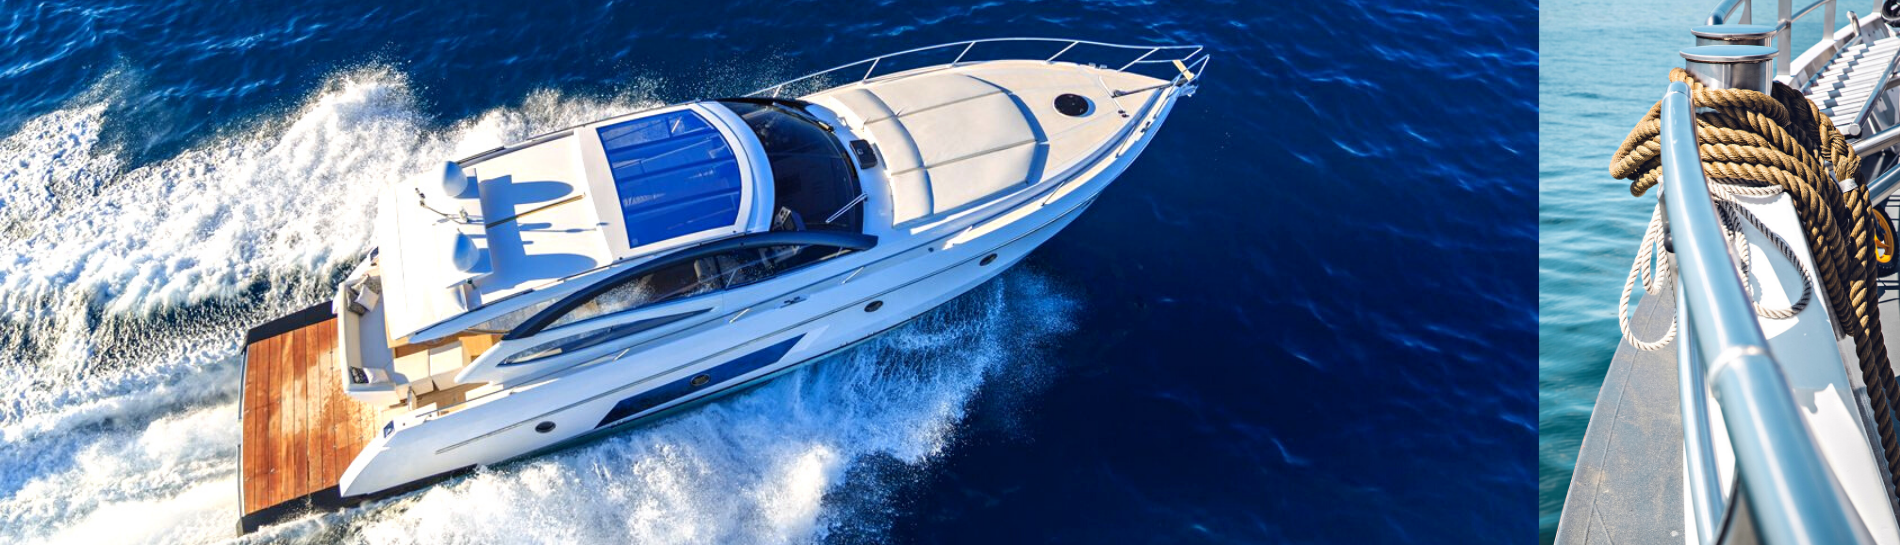 Yacht Care Systems